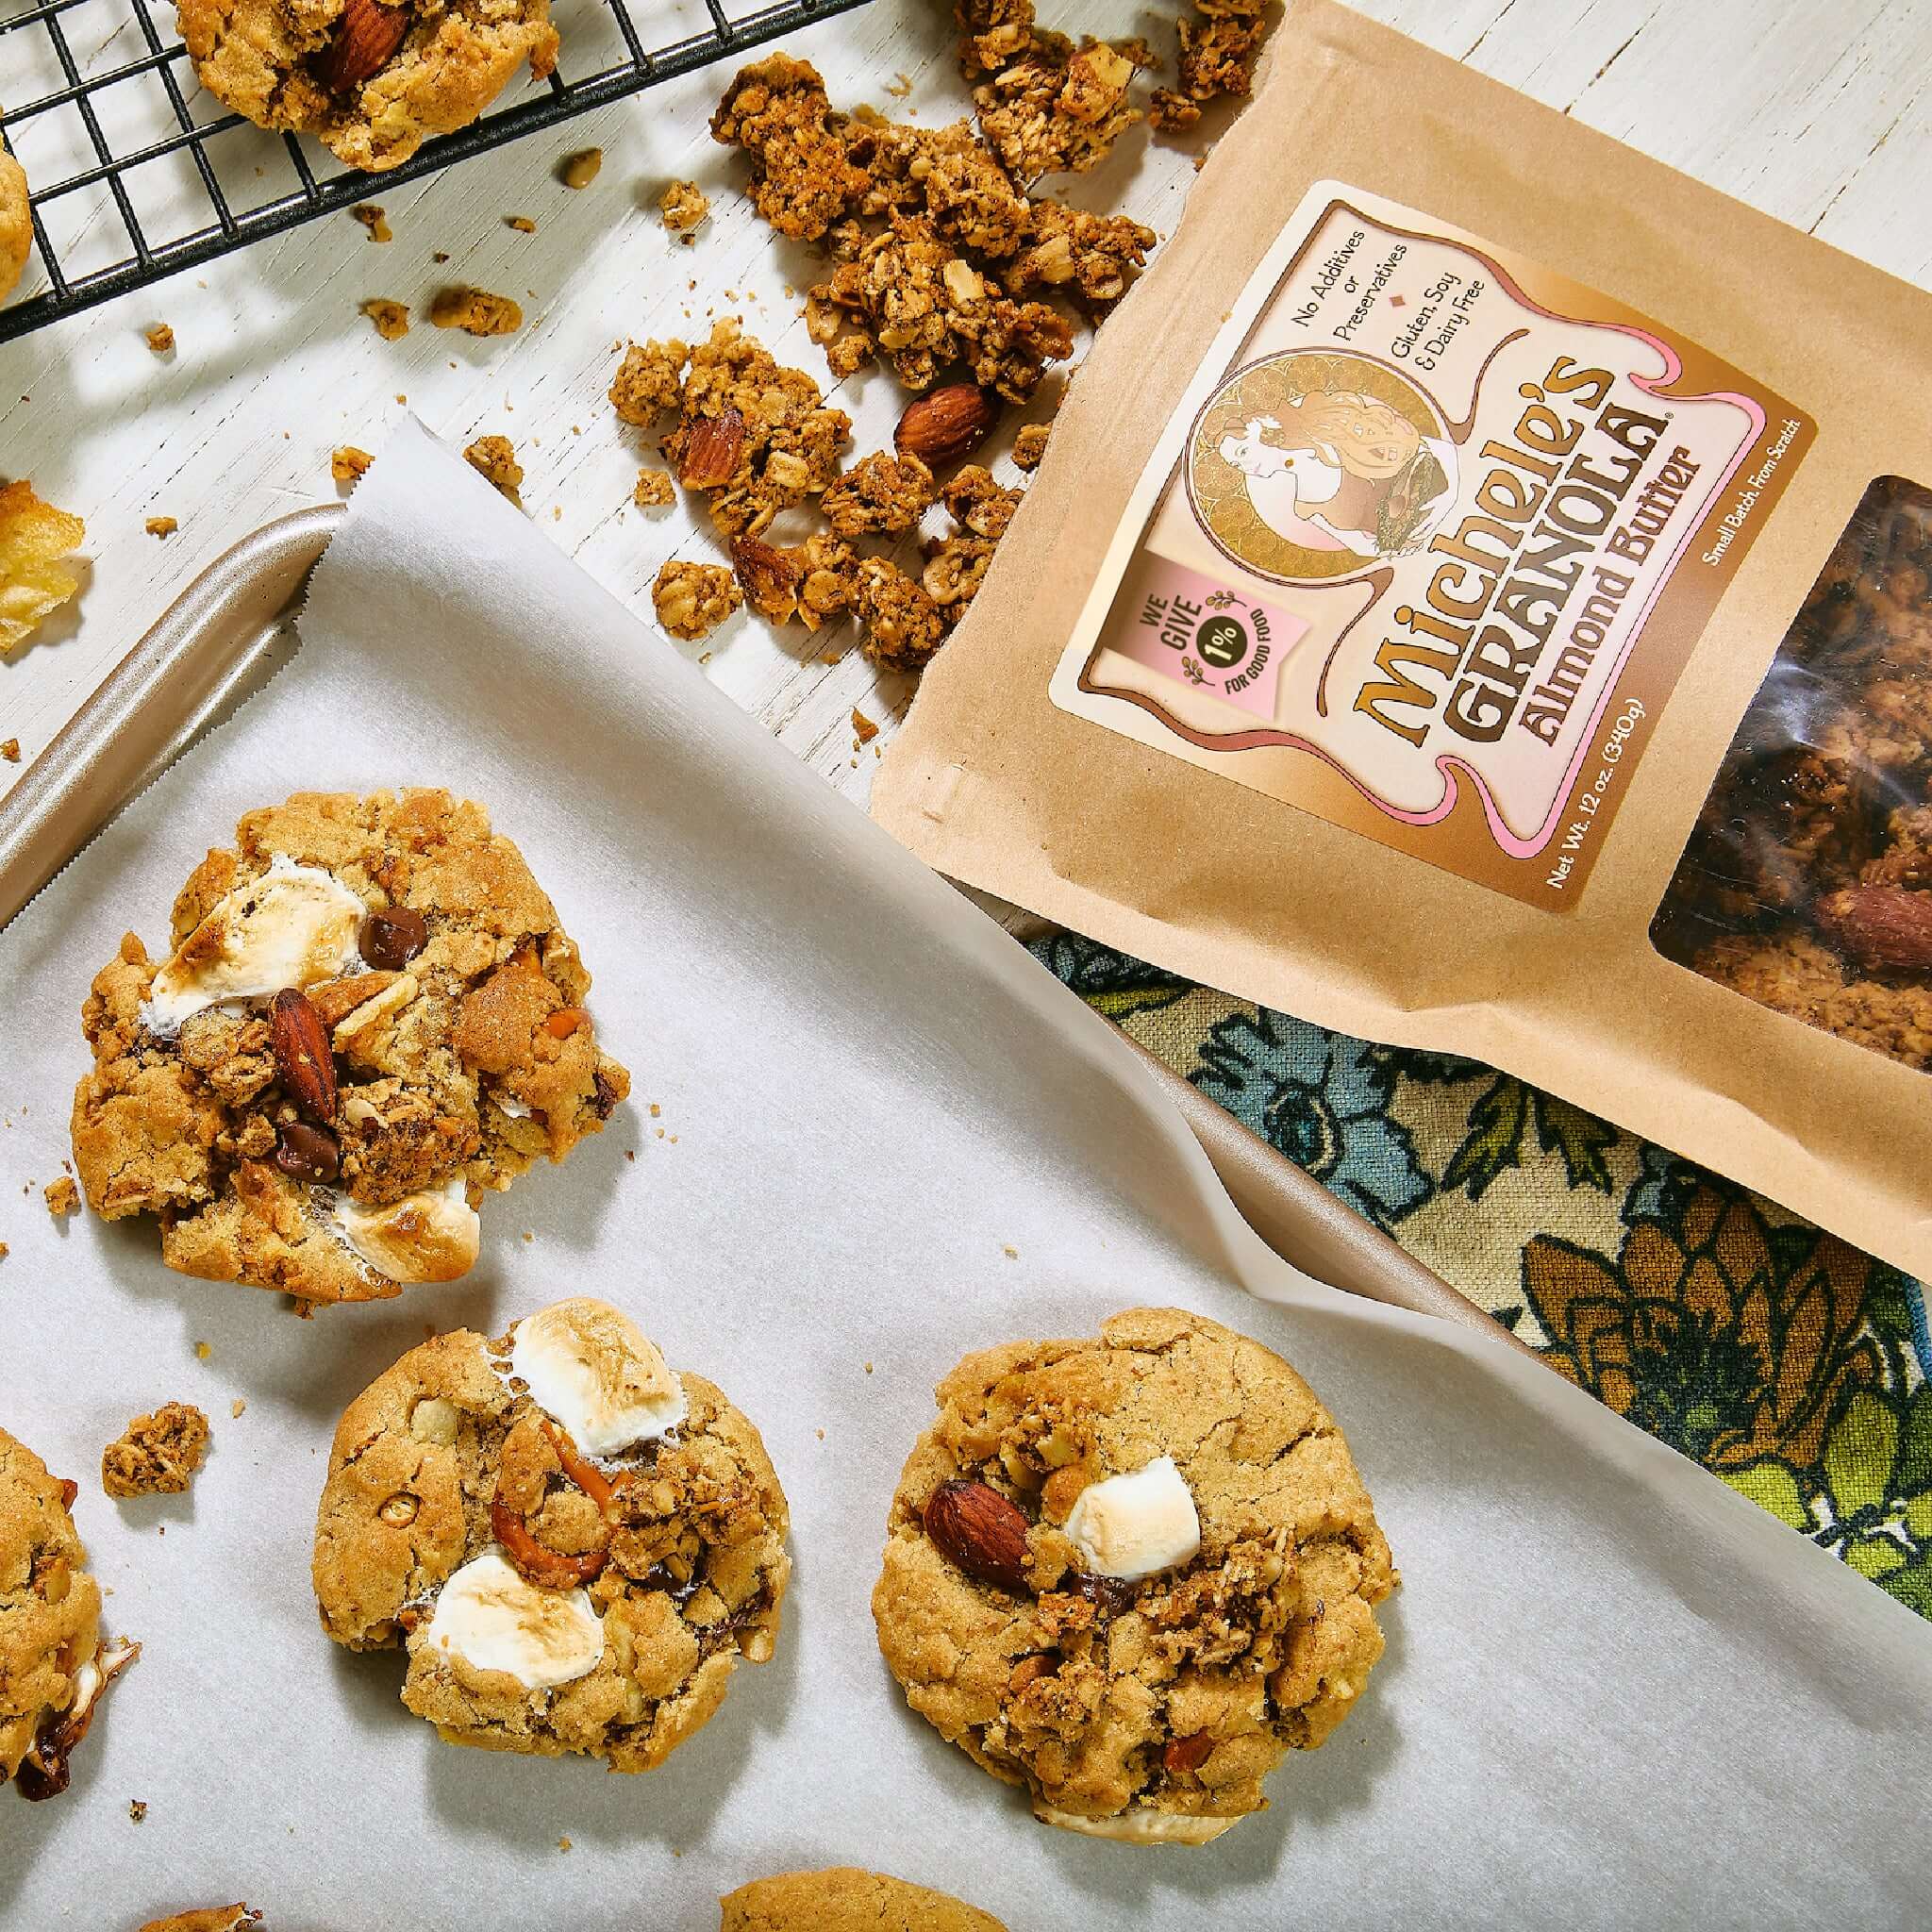 Michele's Almond Butter Granola baked into cookies